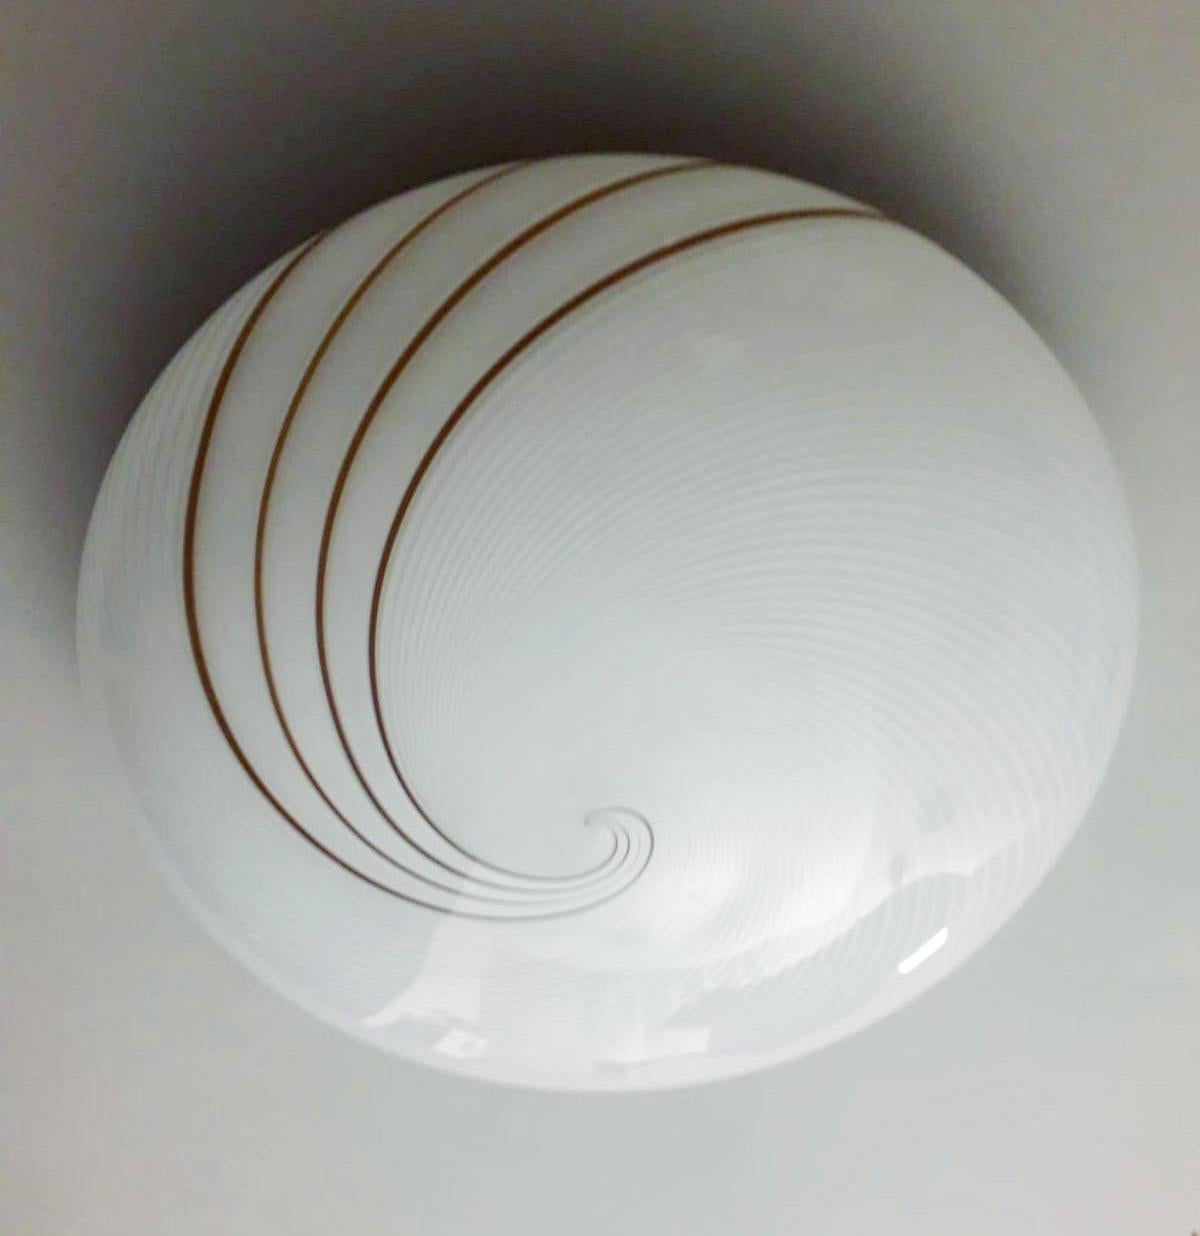 Vintage Italian flush mount or wall light with a single Murano glass shade with ribbed spiral pattern in frosted white and brown colors, mounted white metal frame, in the style of Venini / Made in Italy circa 1960s
Measures: diameter 12 inches,